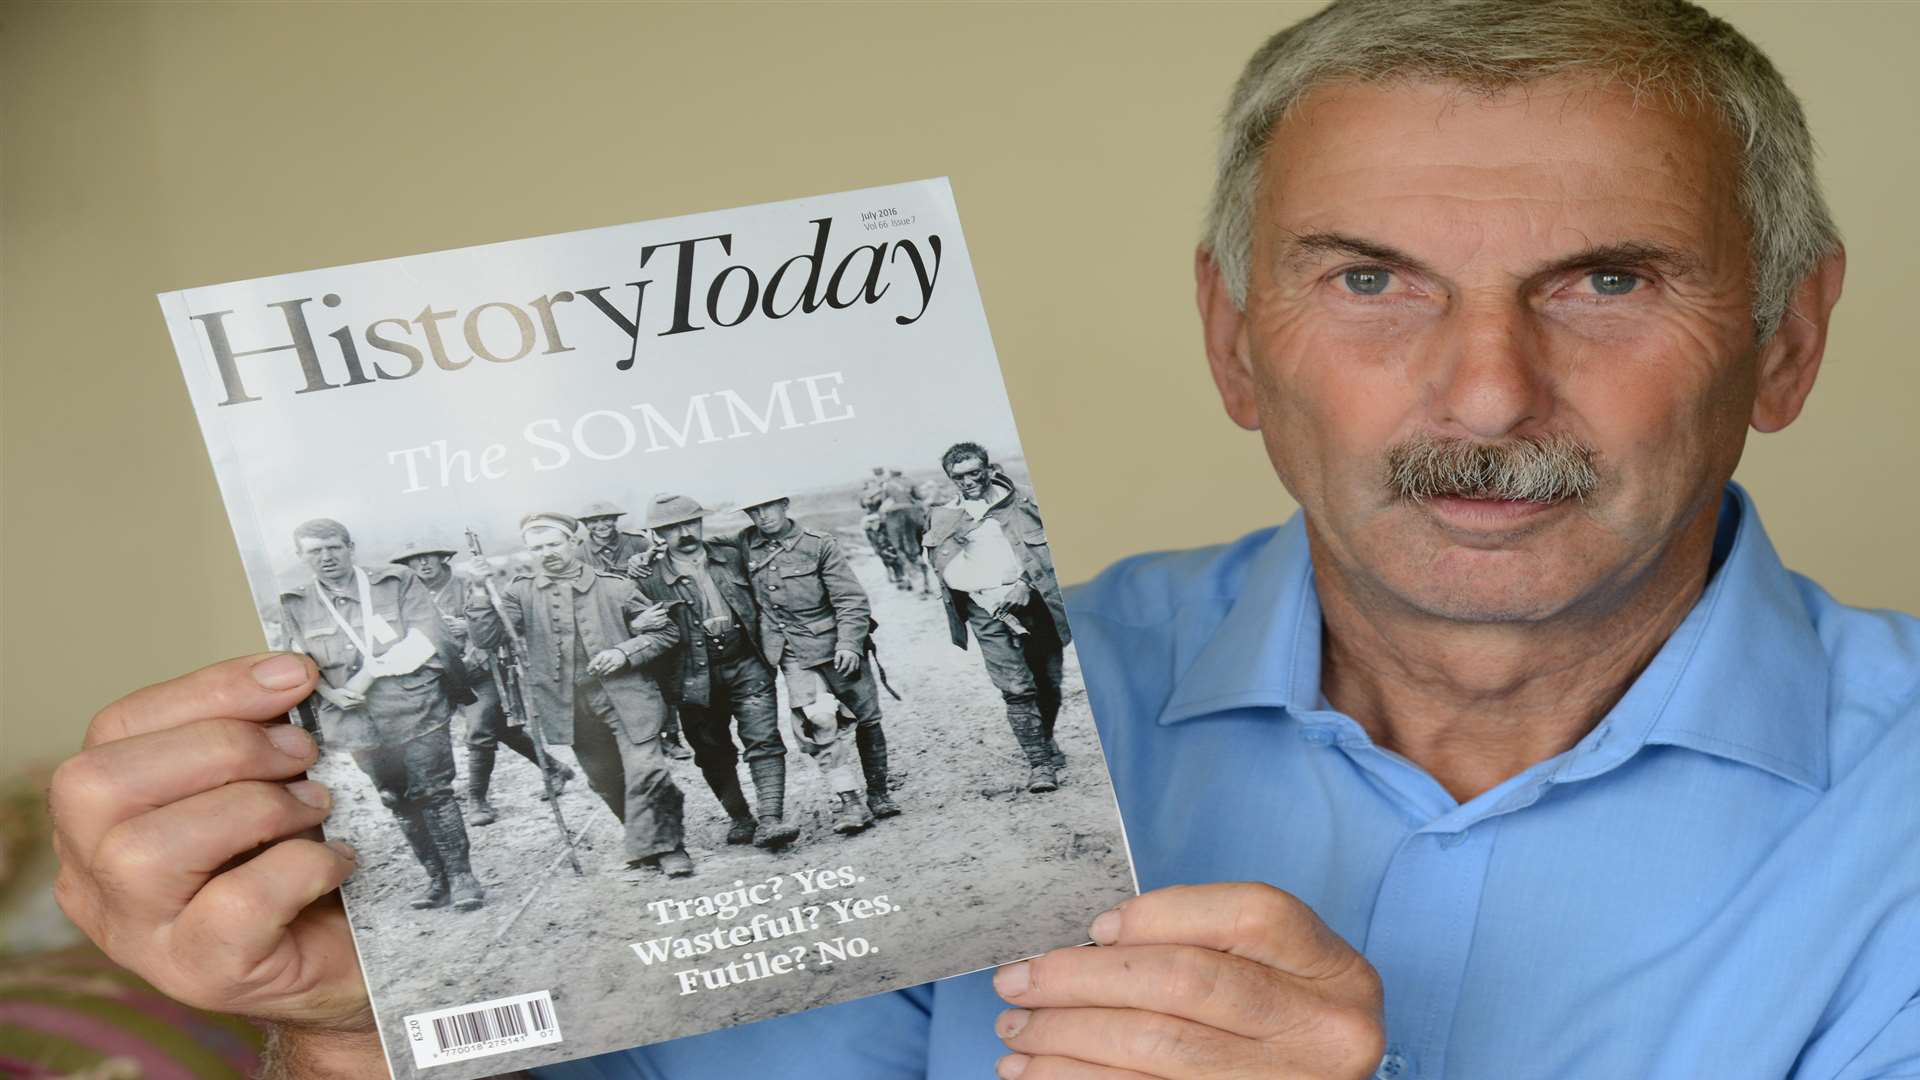 Richard Hopkins, with a copy of History Today, featuring the image of his grandfather